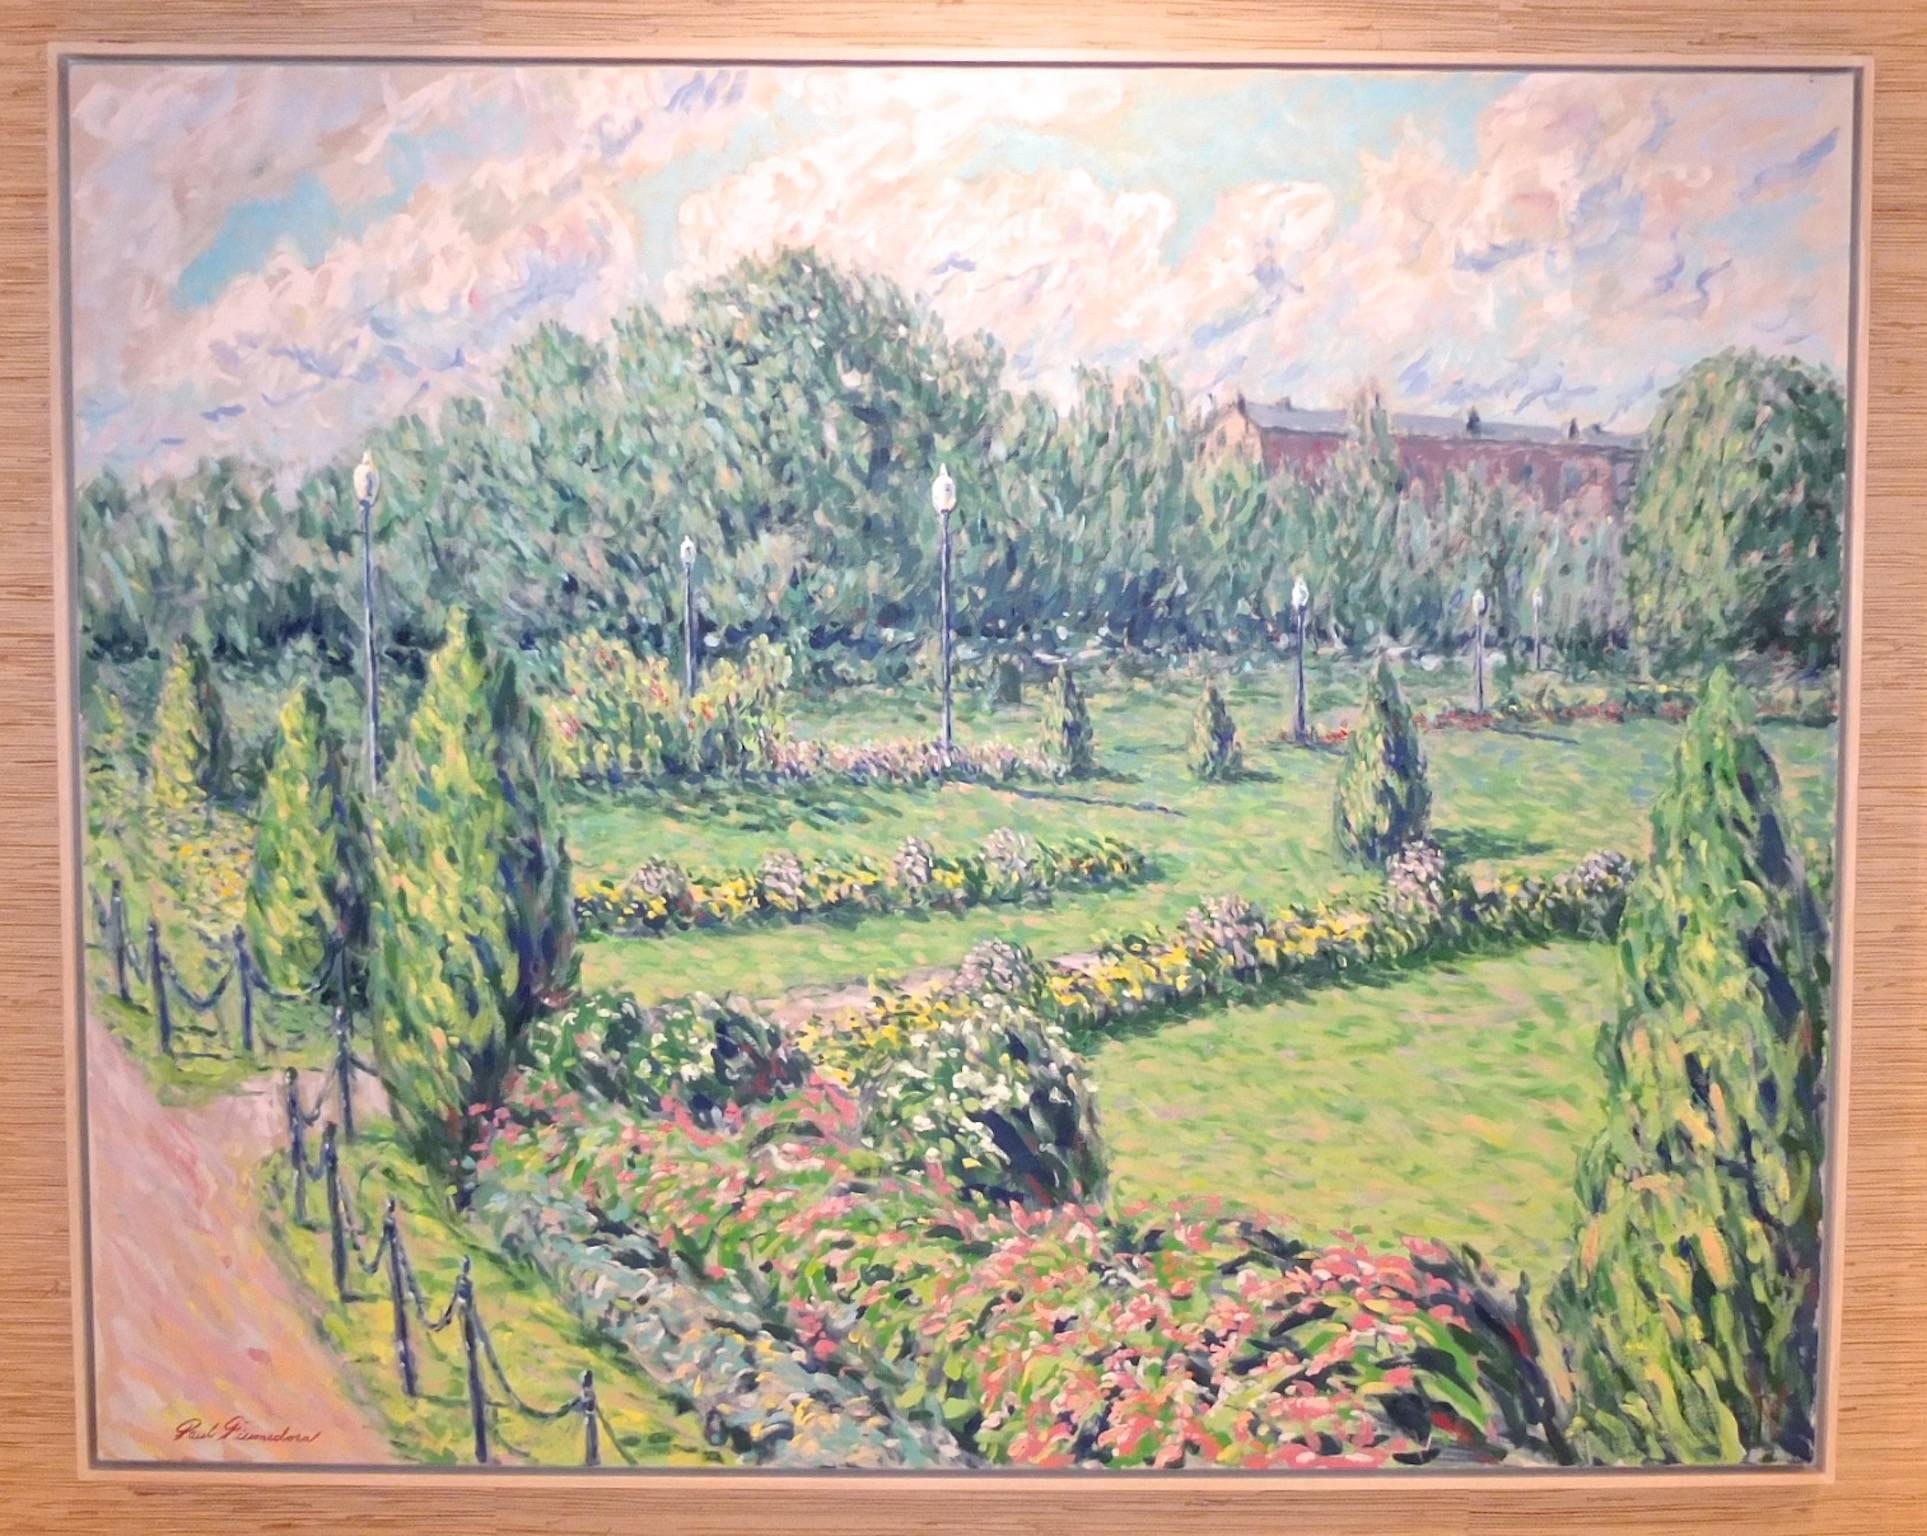 large-scale landscape painting of the Boston Public Gardens in spring/summer, acrylic on canvas, framed in thin modern wood frame painted beige-cream. Signed by the artist Paul Fiumedora.  See artist's bio in image 5.

Dimensions shown include the